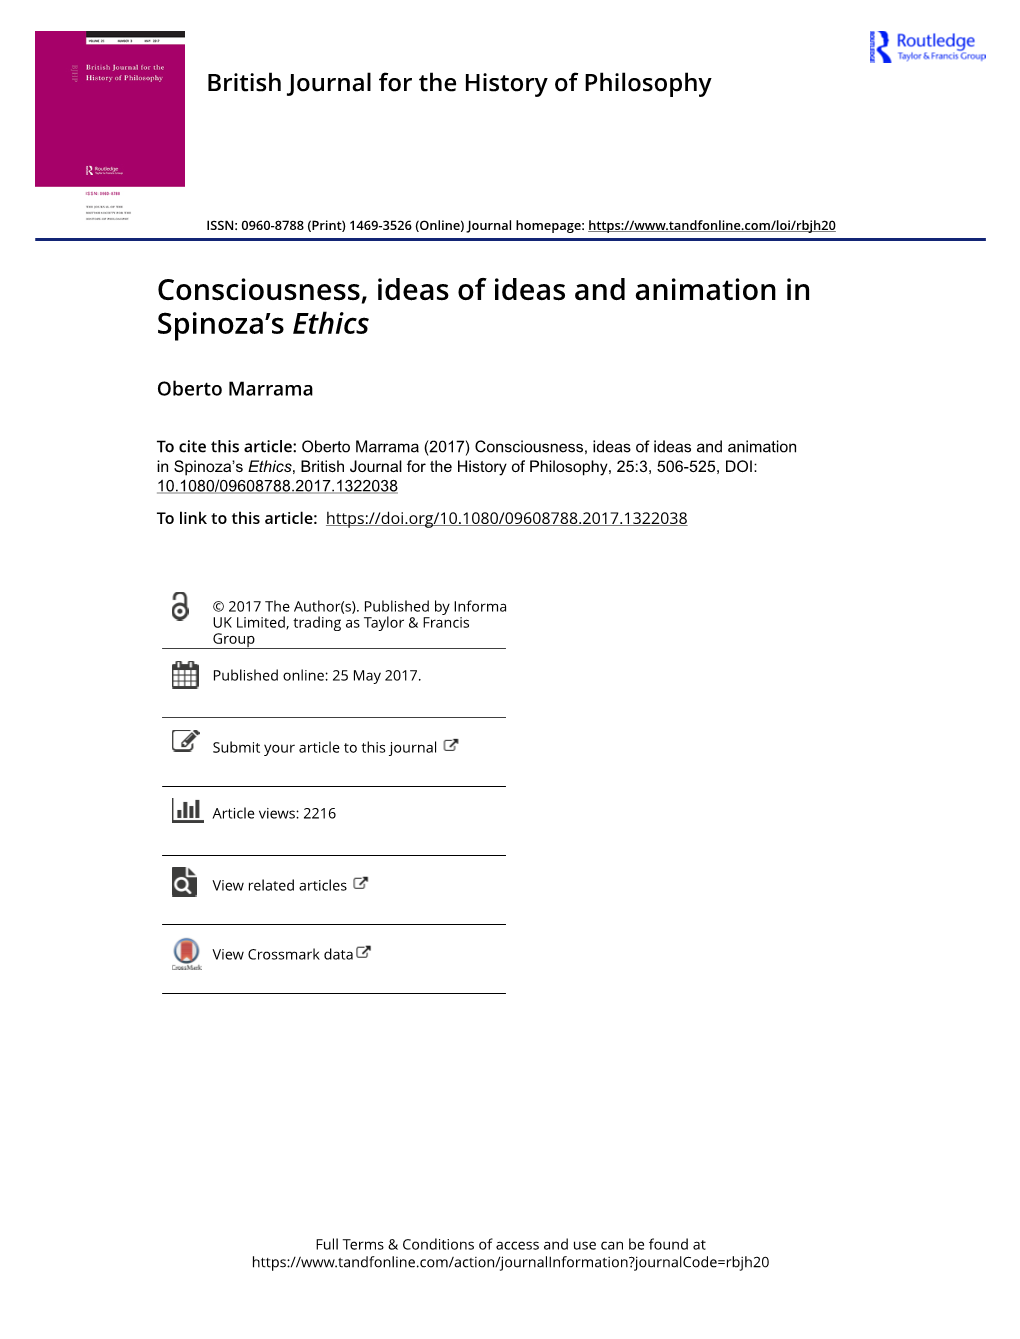 Consciousness, Ideas of Ideas and Animation in Spinoza's Ethics